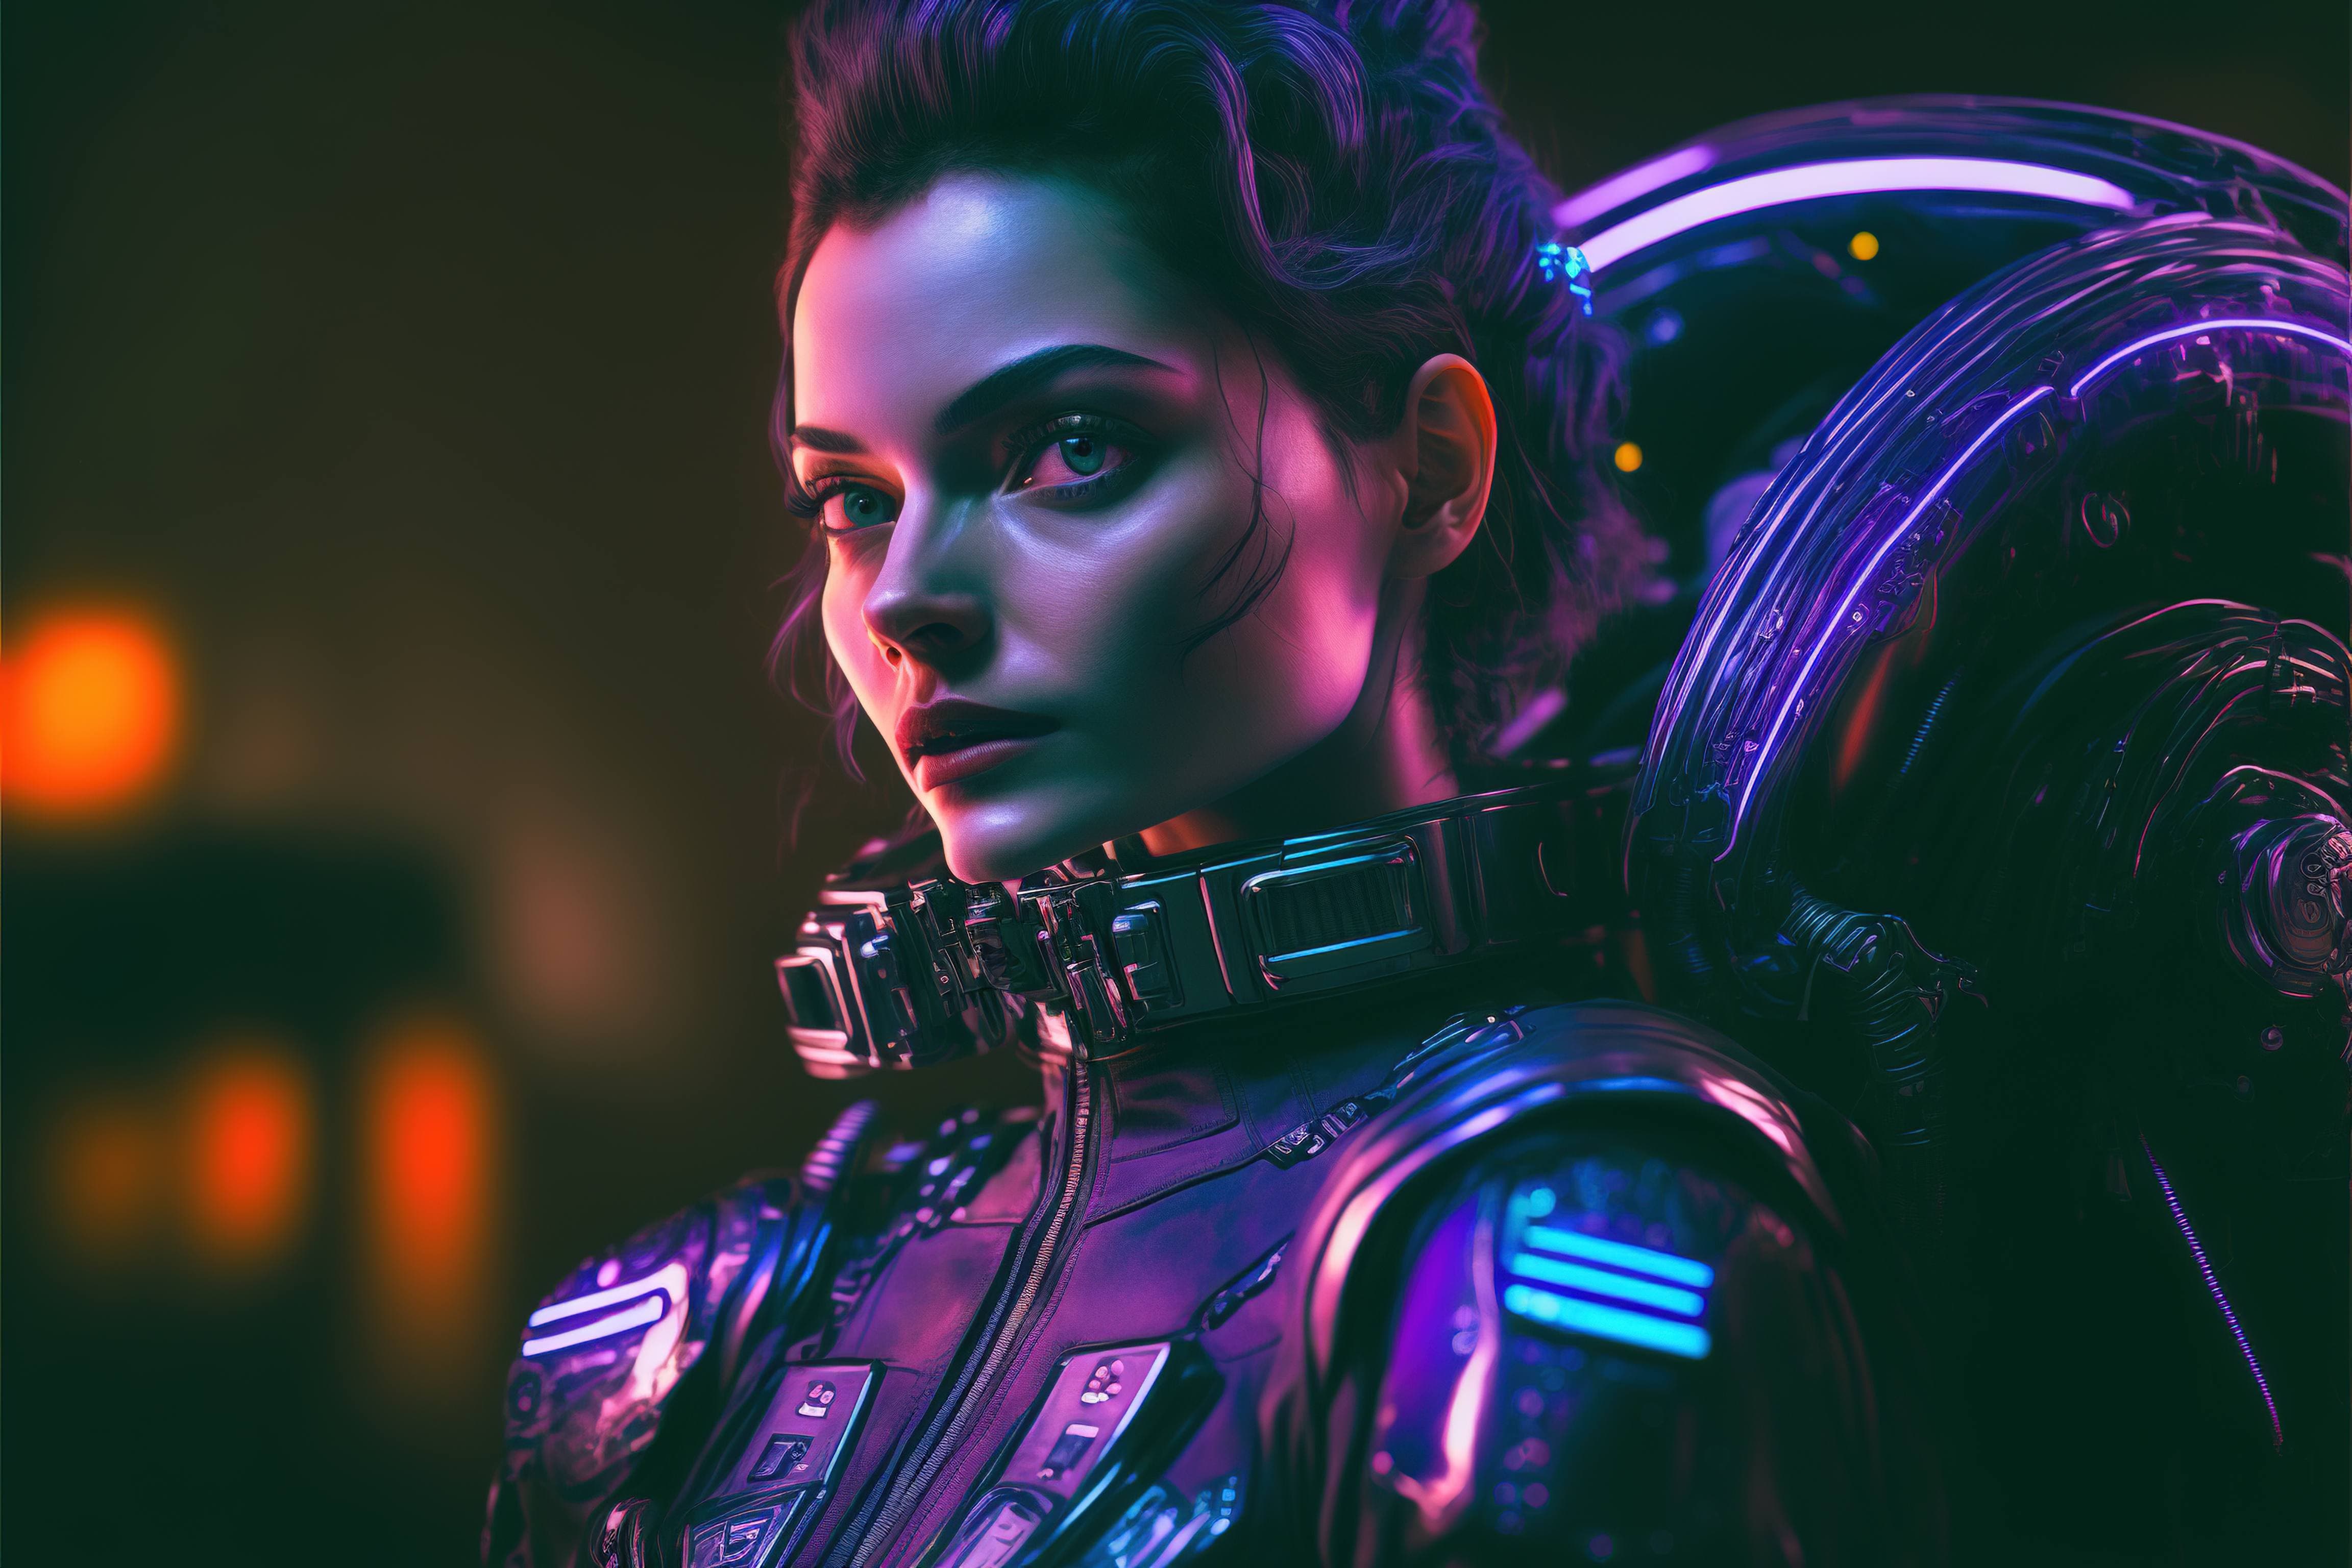 Person with a cyberpunk aesthetic